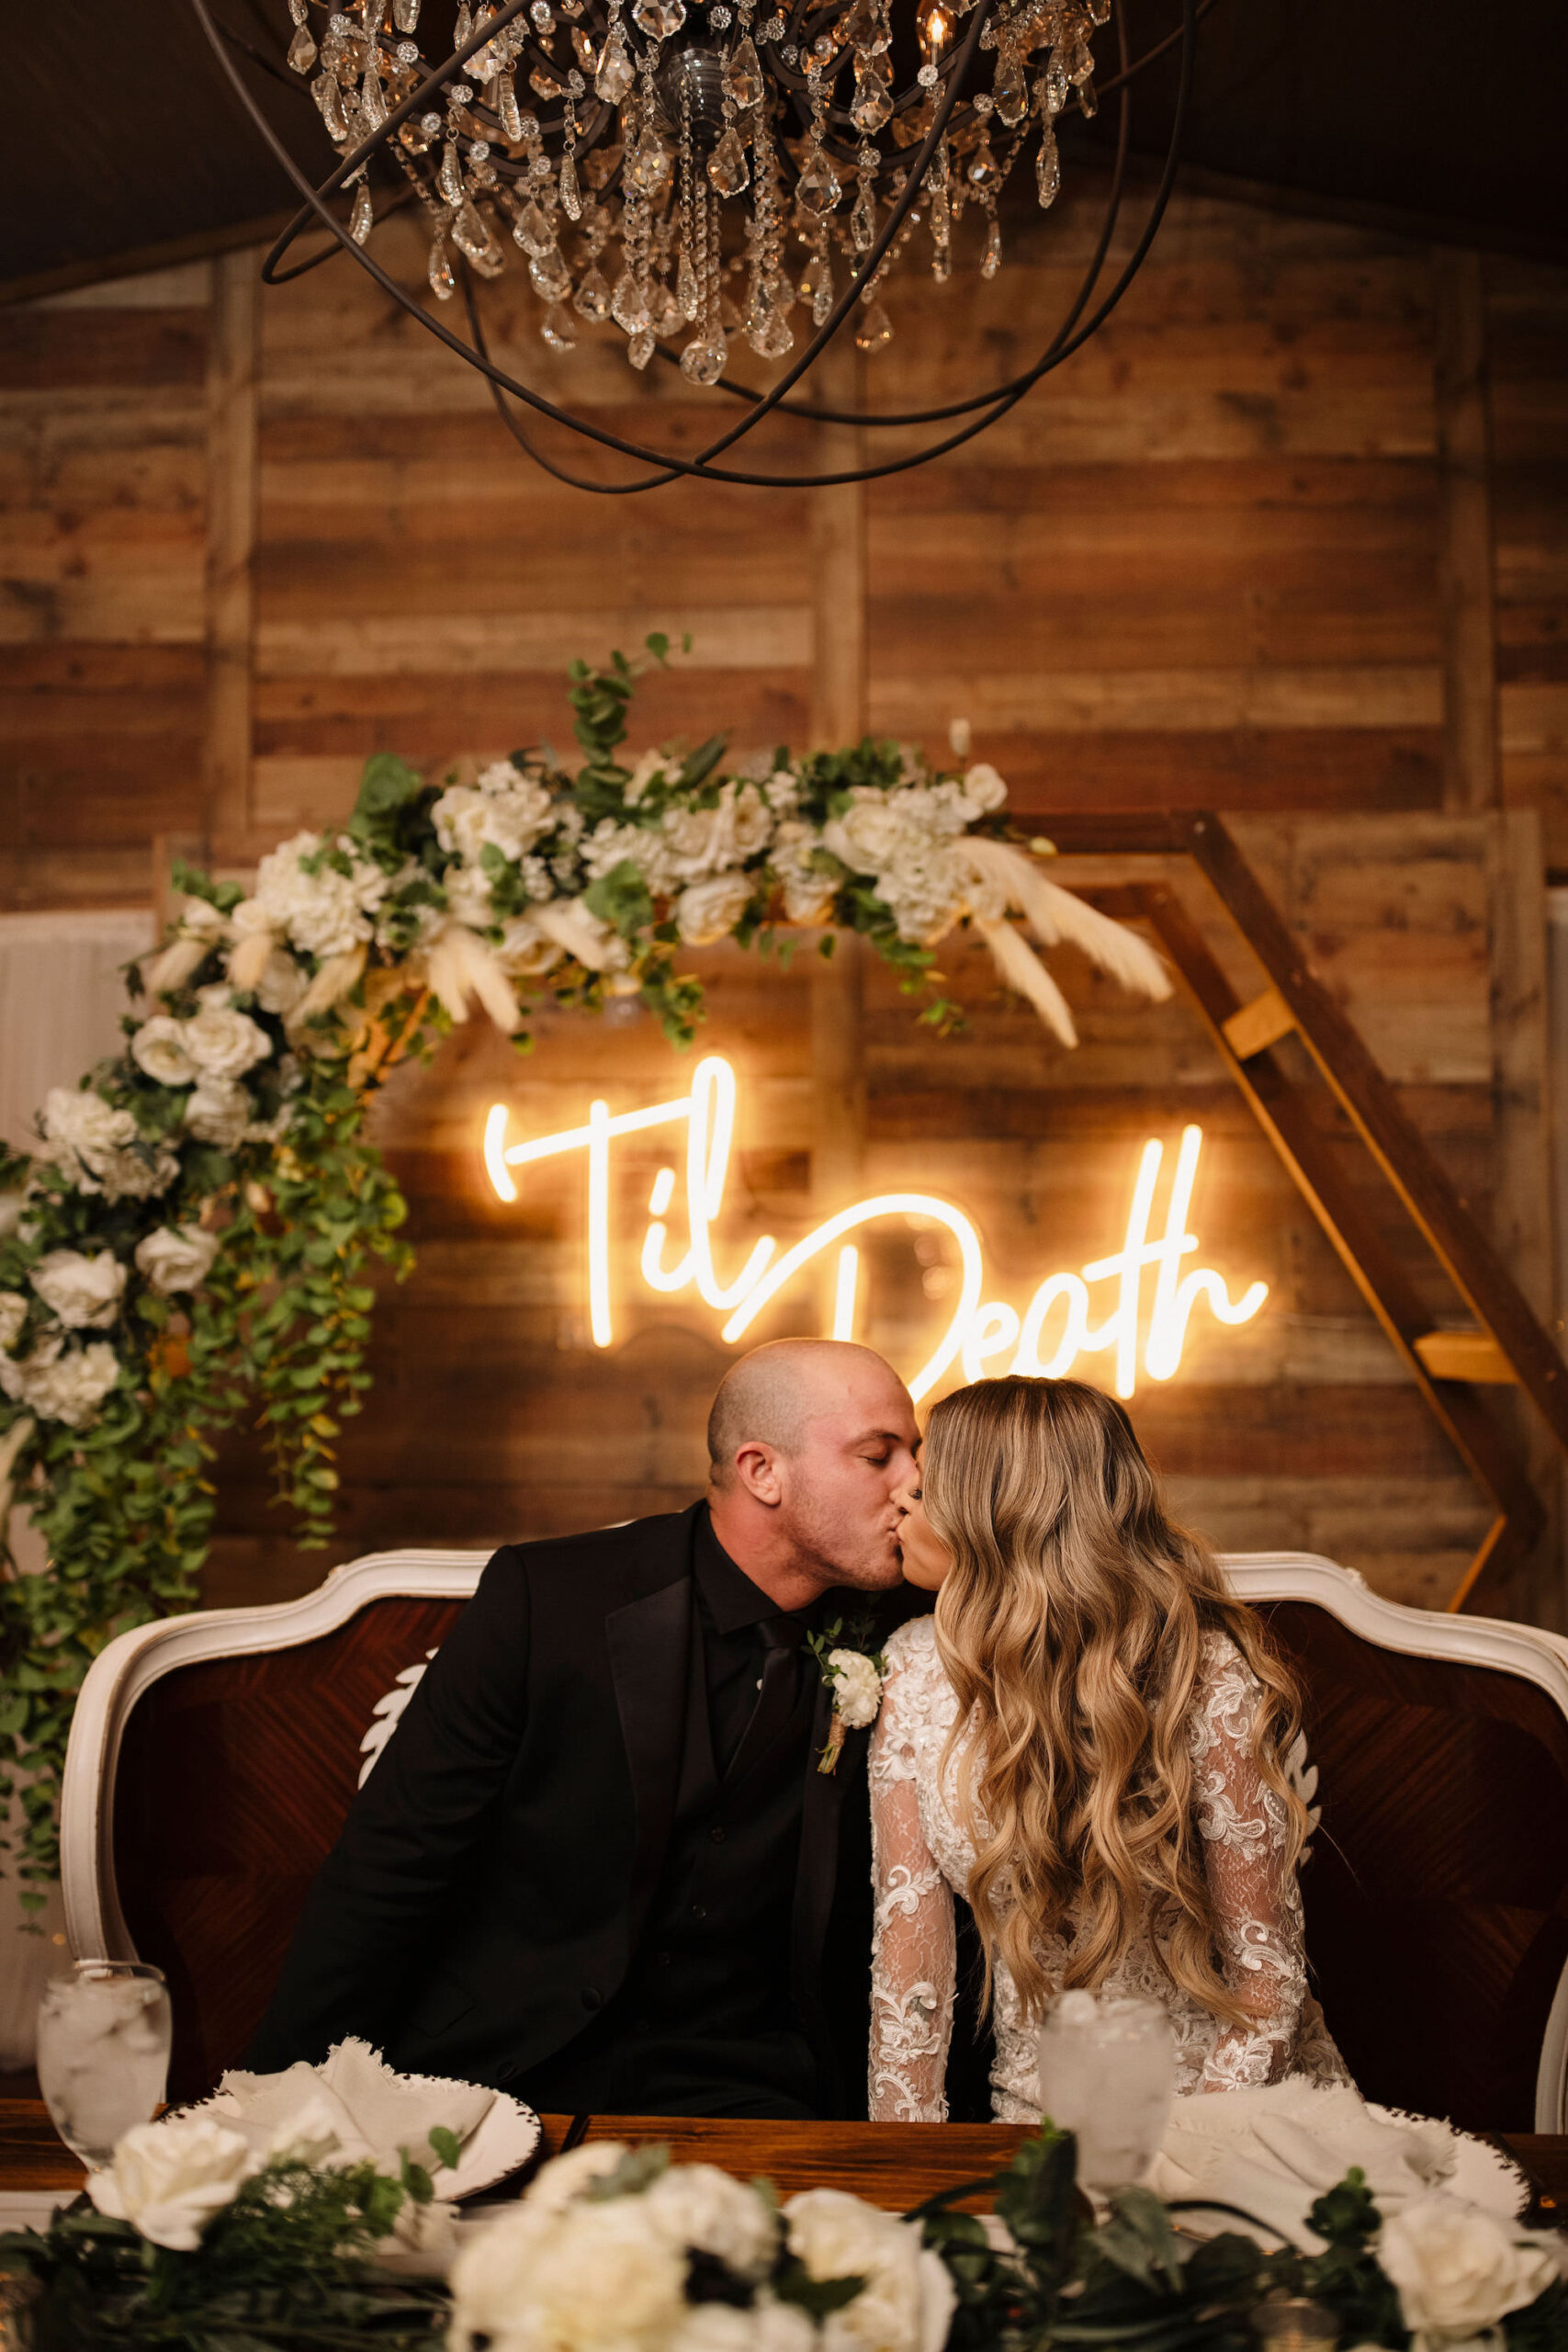 Wedding Reception Sweetheart Table With Hexagon Arch and White Flowers with Greenery and Pampas Grass Decor Ideas | Bench Seating | Personalized Neon Sign Ideas | Tampa Bay Wedding Venue Cross Creek Ranch